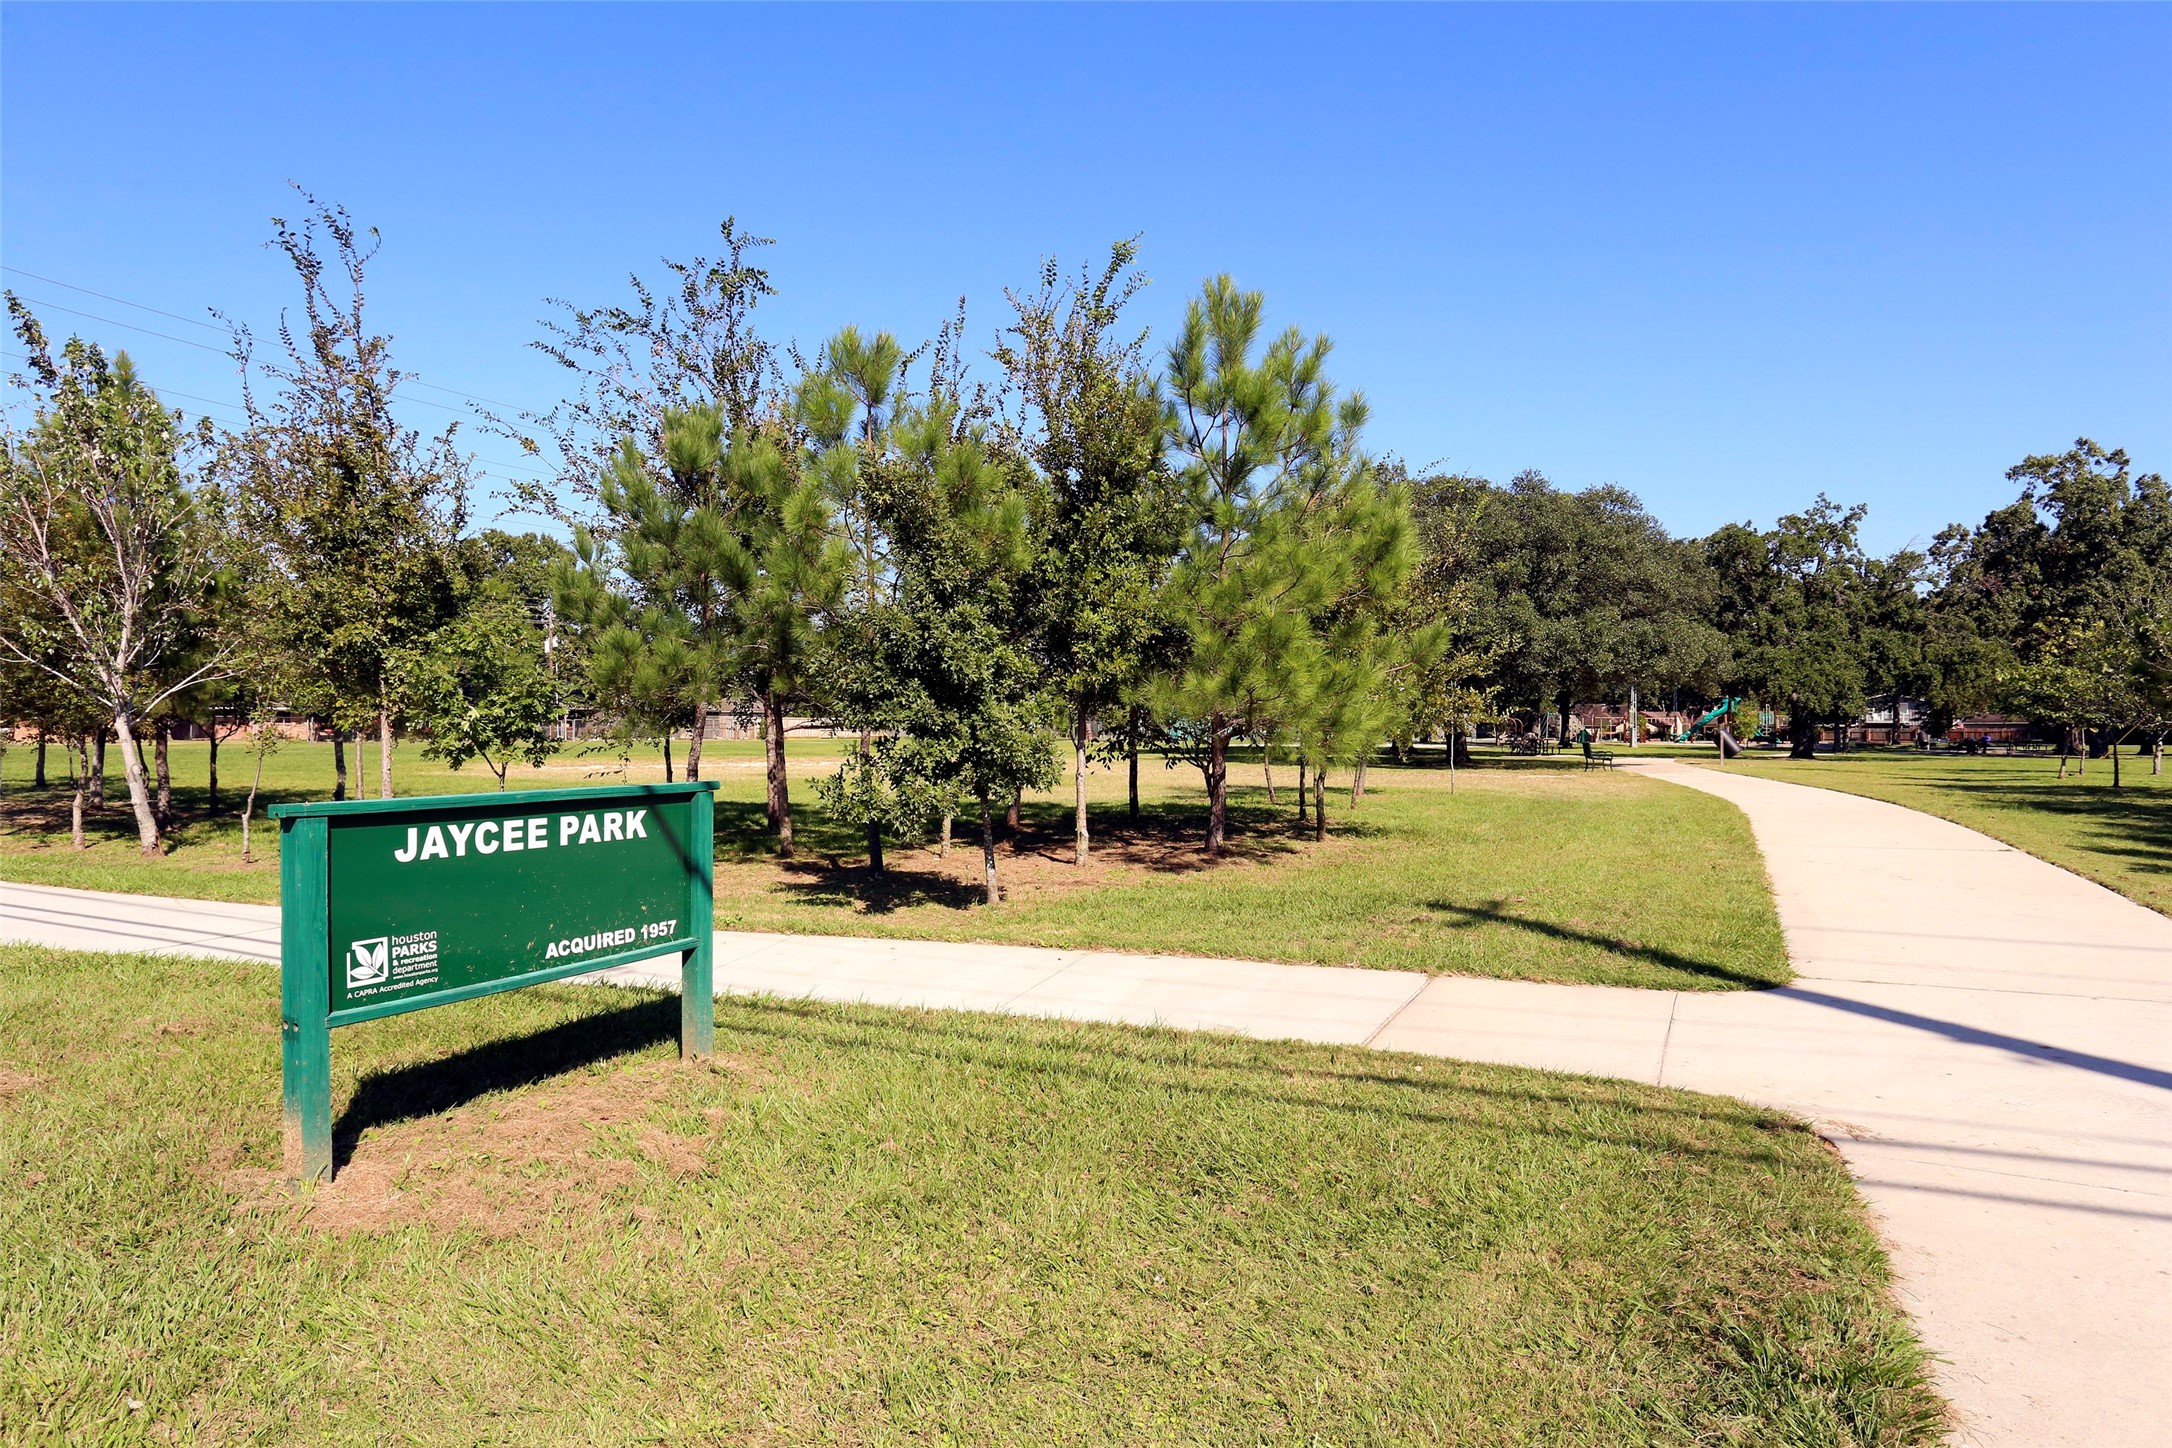 Palisades Park: Located in one of Houston's most desirable neighborhoods. Easy access to all major highways, the community is only minutes from Memorial Park, The Heights, Galleria, Downtown & Washington Corridor & many recreational parks at walking distance.